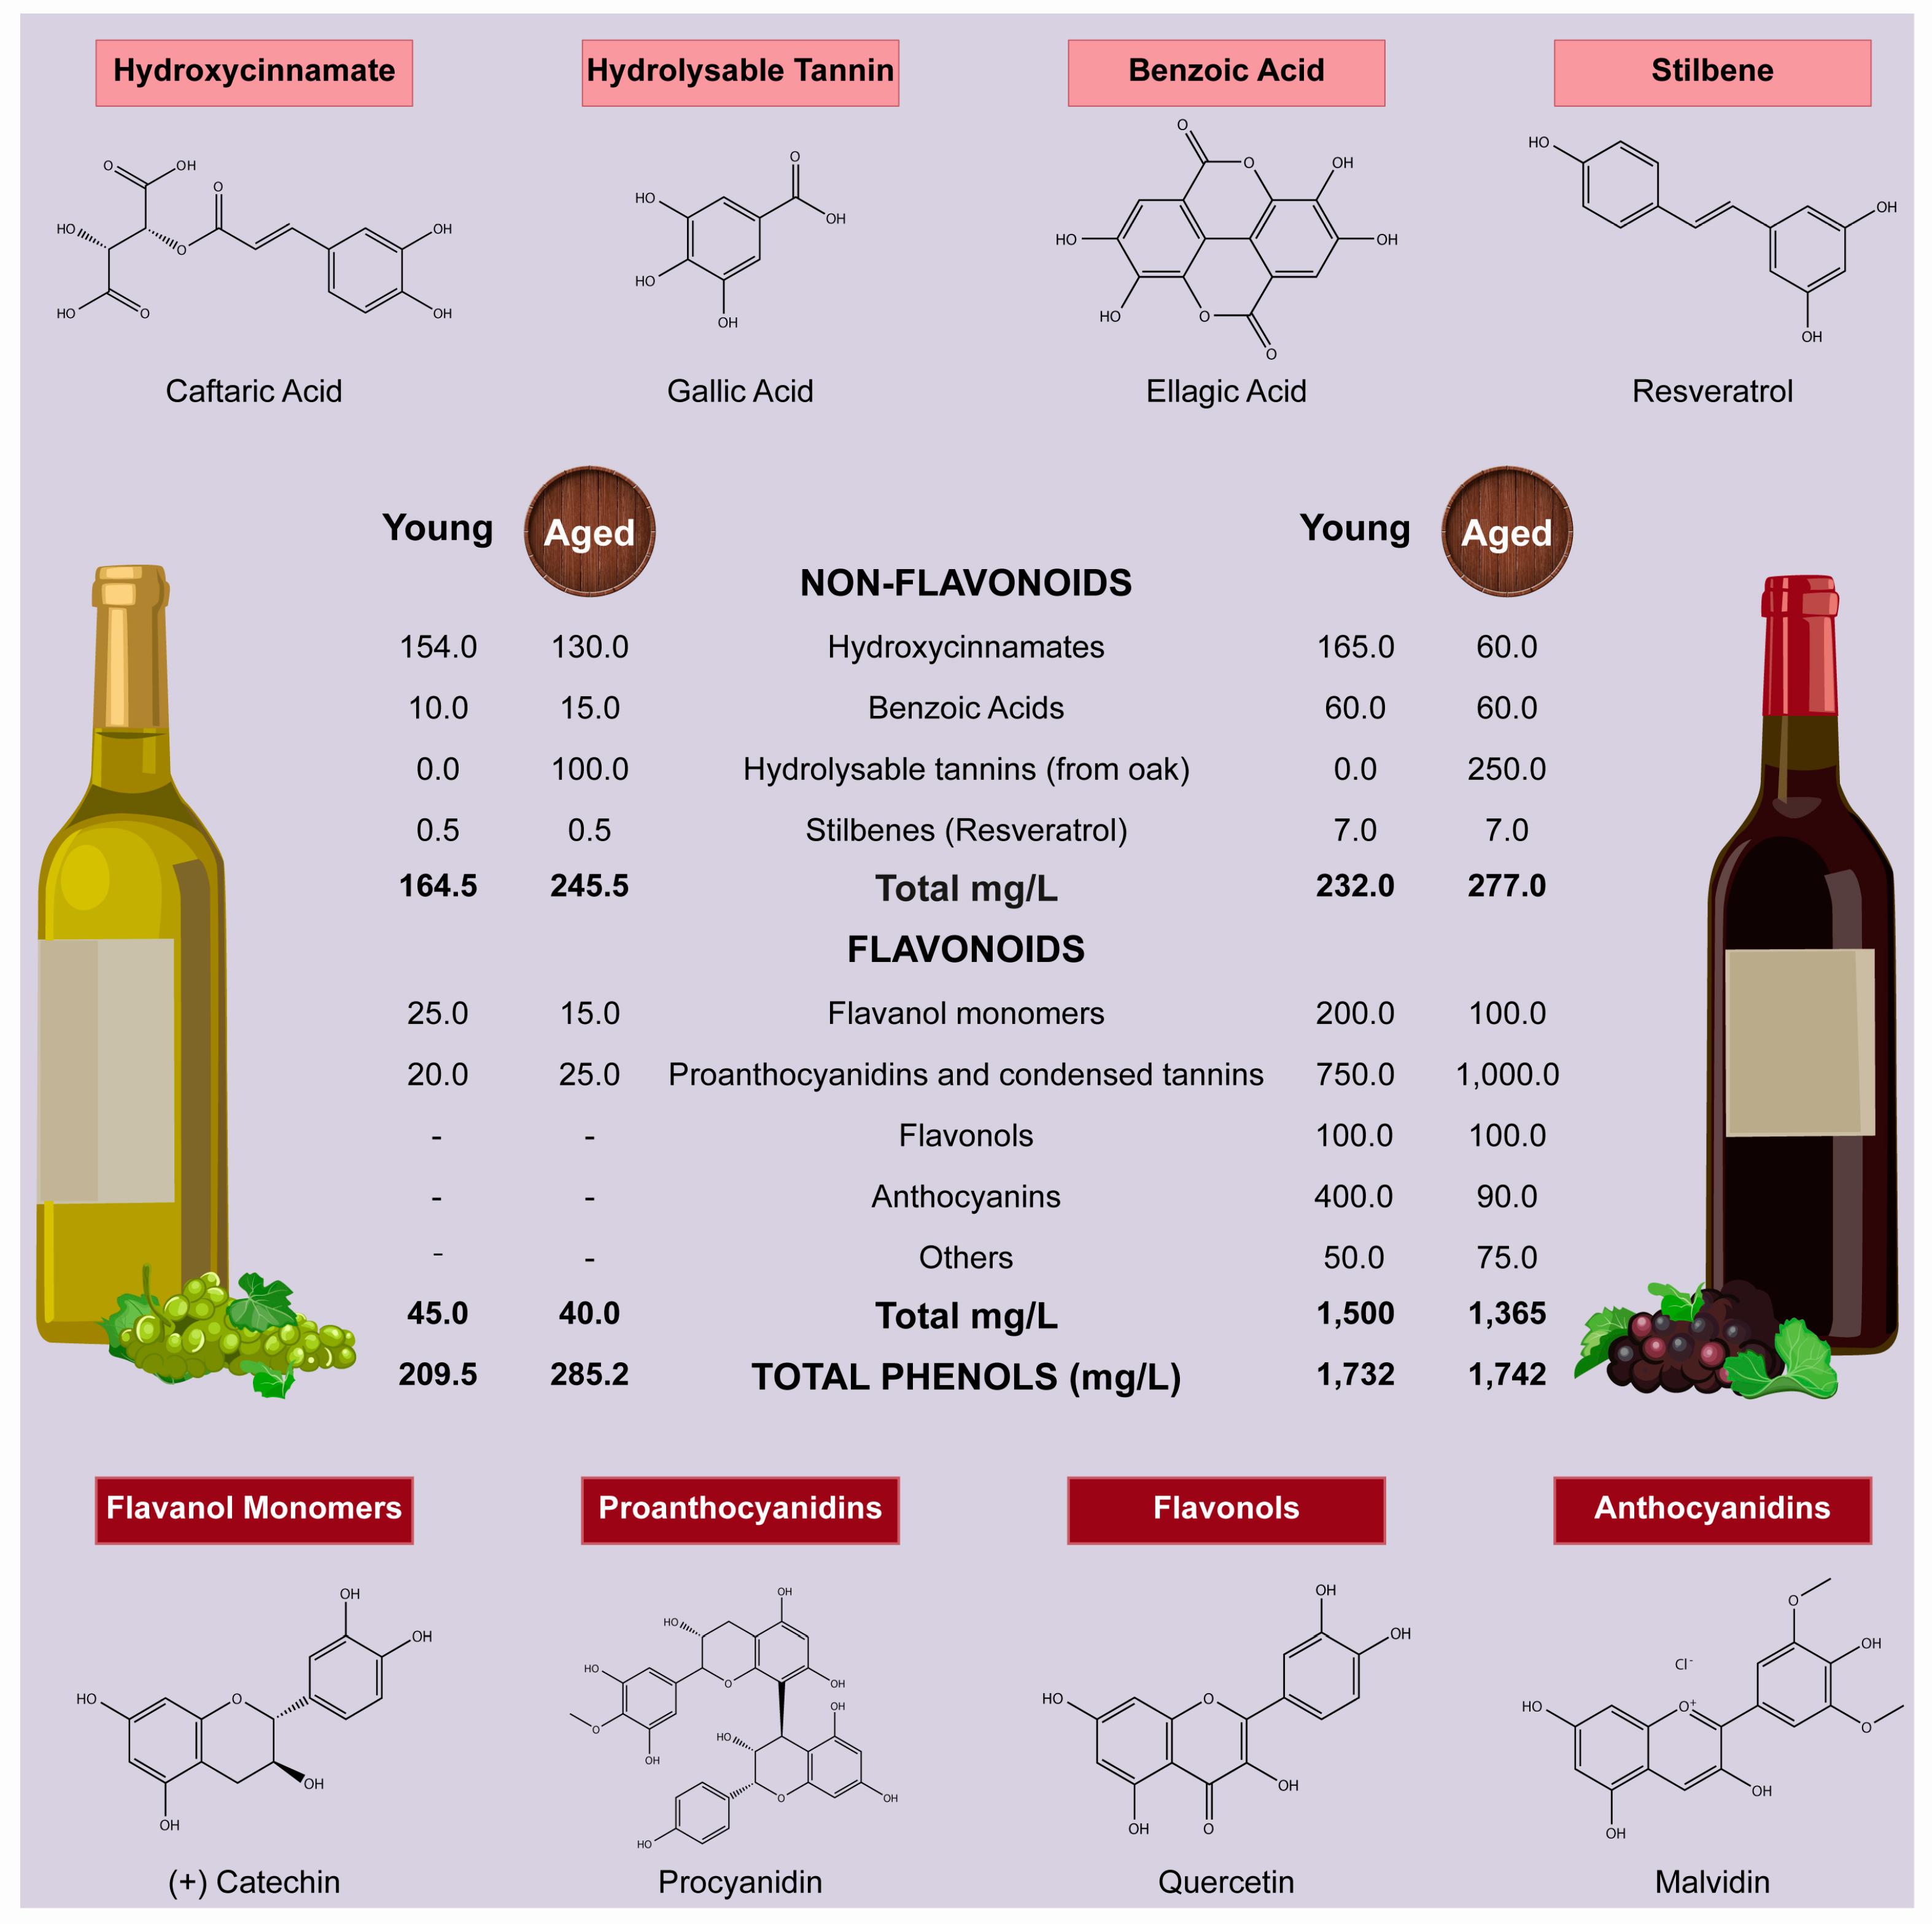 A table of the concentration in mg/L of different types of polyphenols in red wine, broken down by type and age.